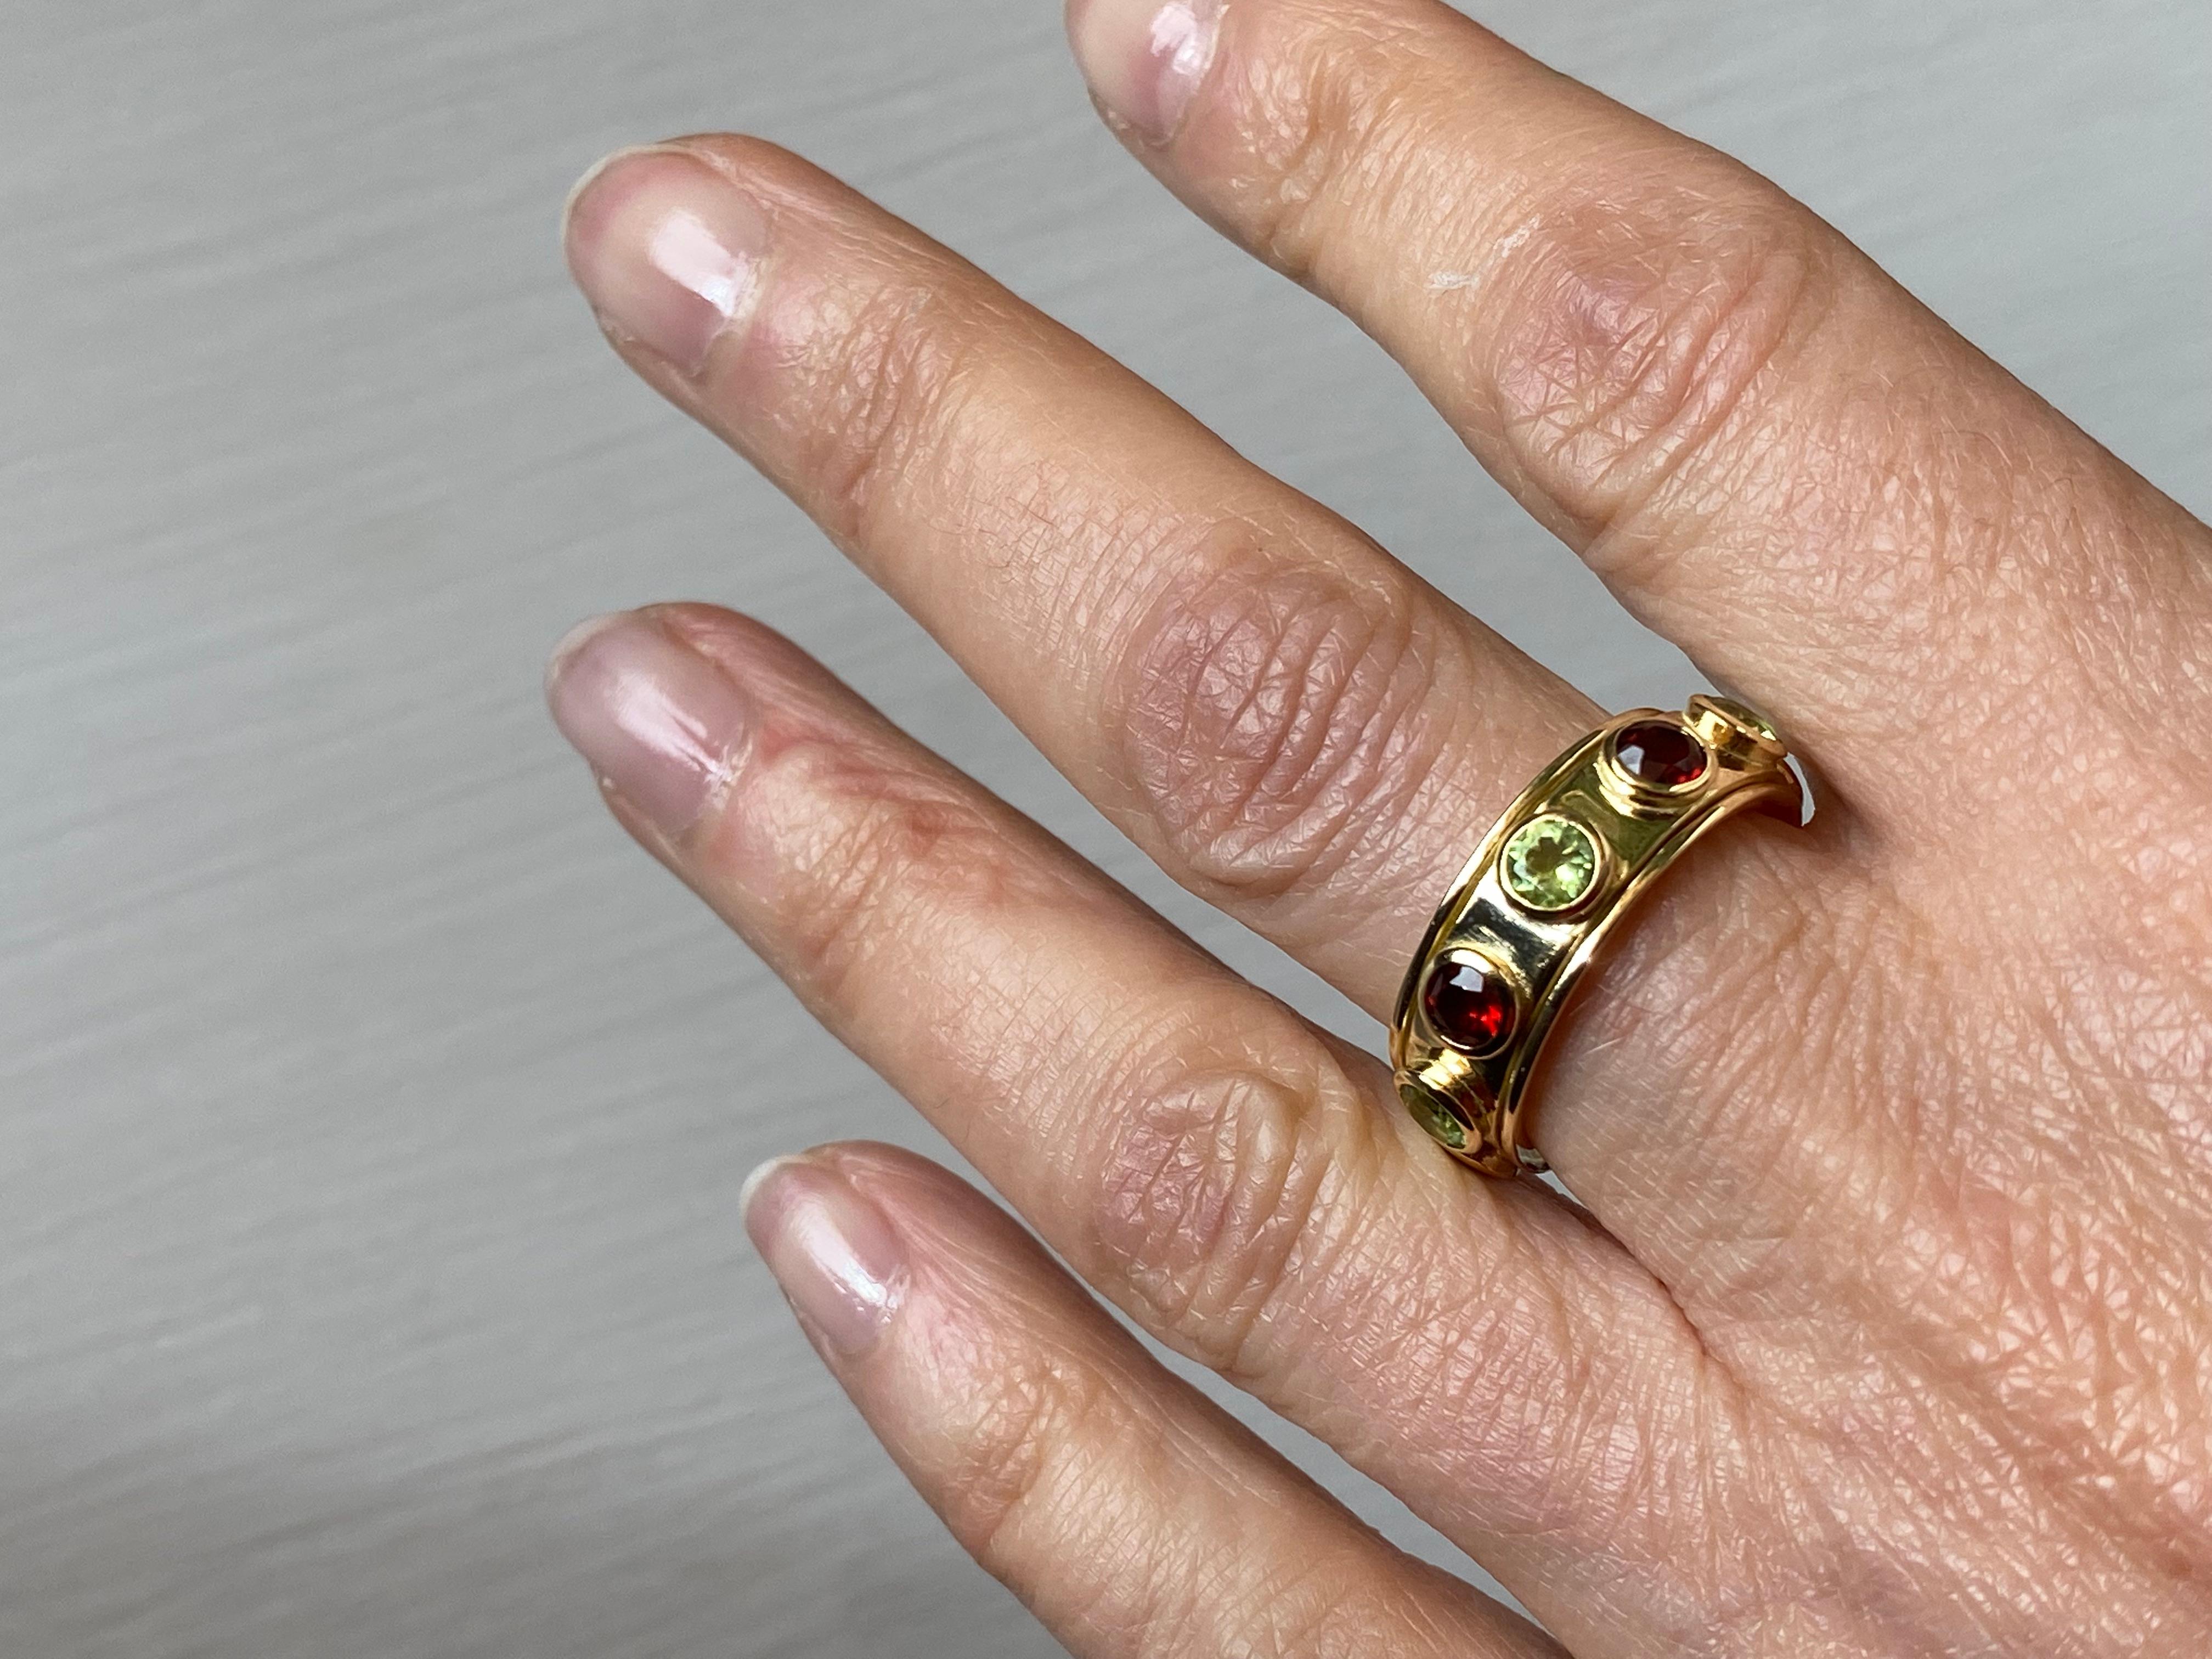 Rossella Ugolini design collection 18 Karats Yellow Gold Garnet Peridot Design Ring 
This is an amazing rotating cocktail ring is handcrafted in 18 karats yellow gold, adorned with peridot and garnet.
Garnet is often full of shiny, light reflecting